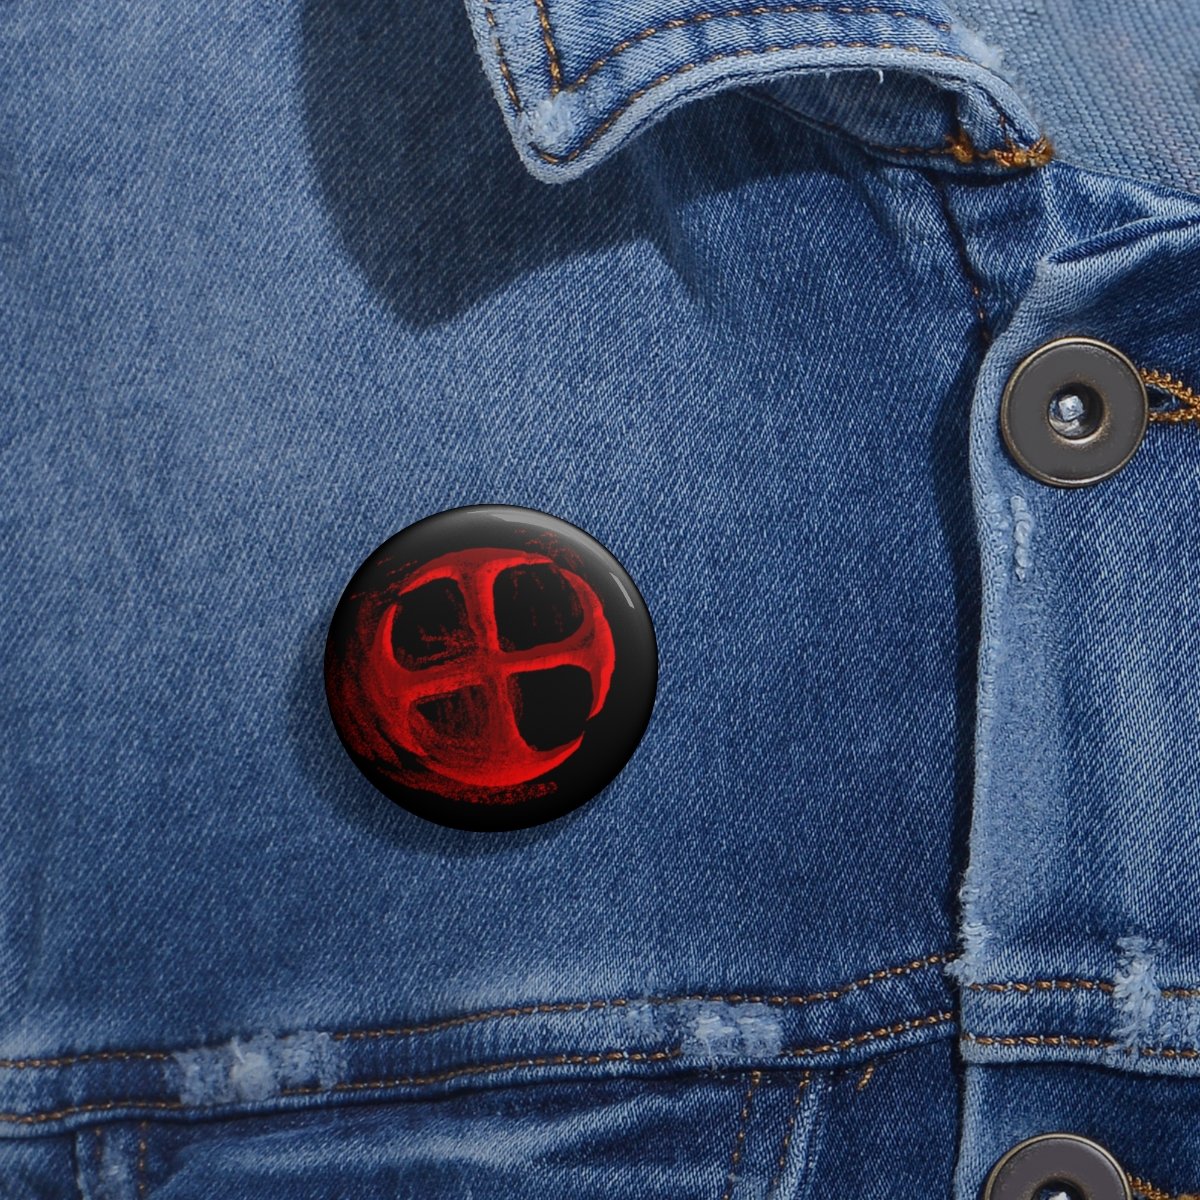 Deliverance Disintegrating Cross Pin Buttons